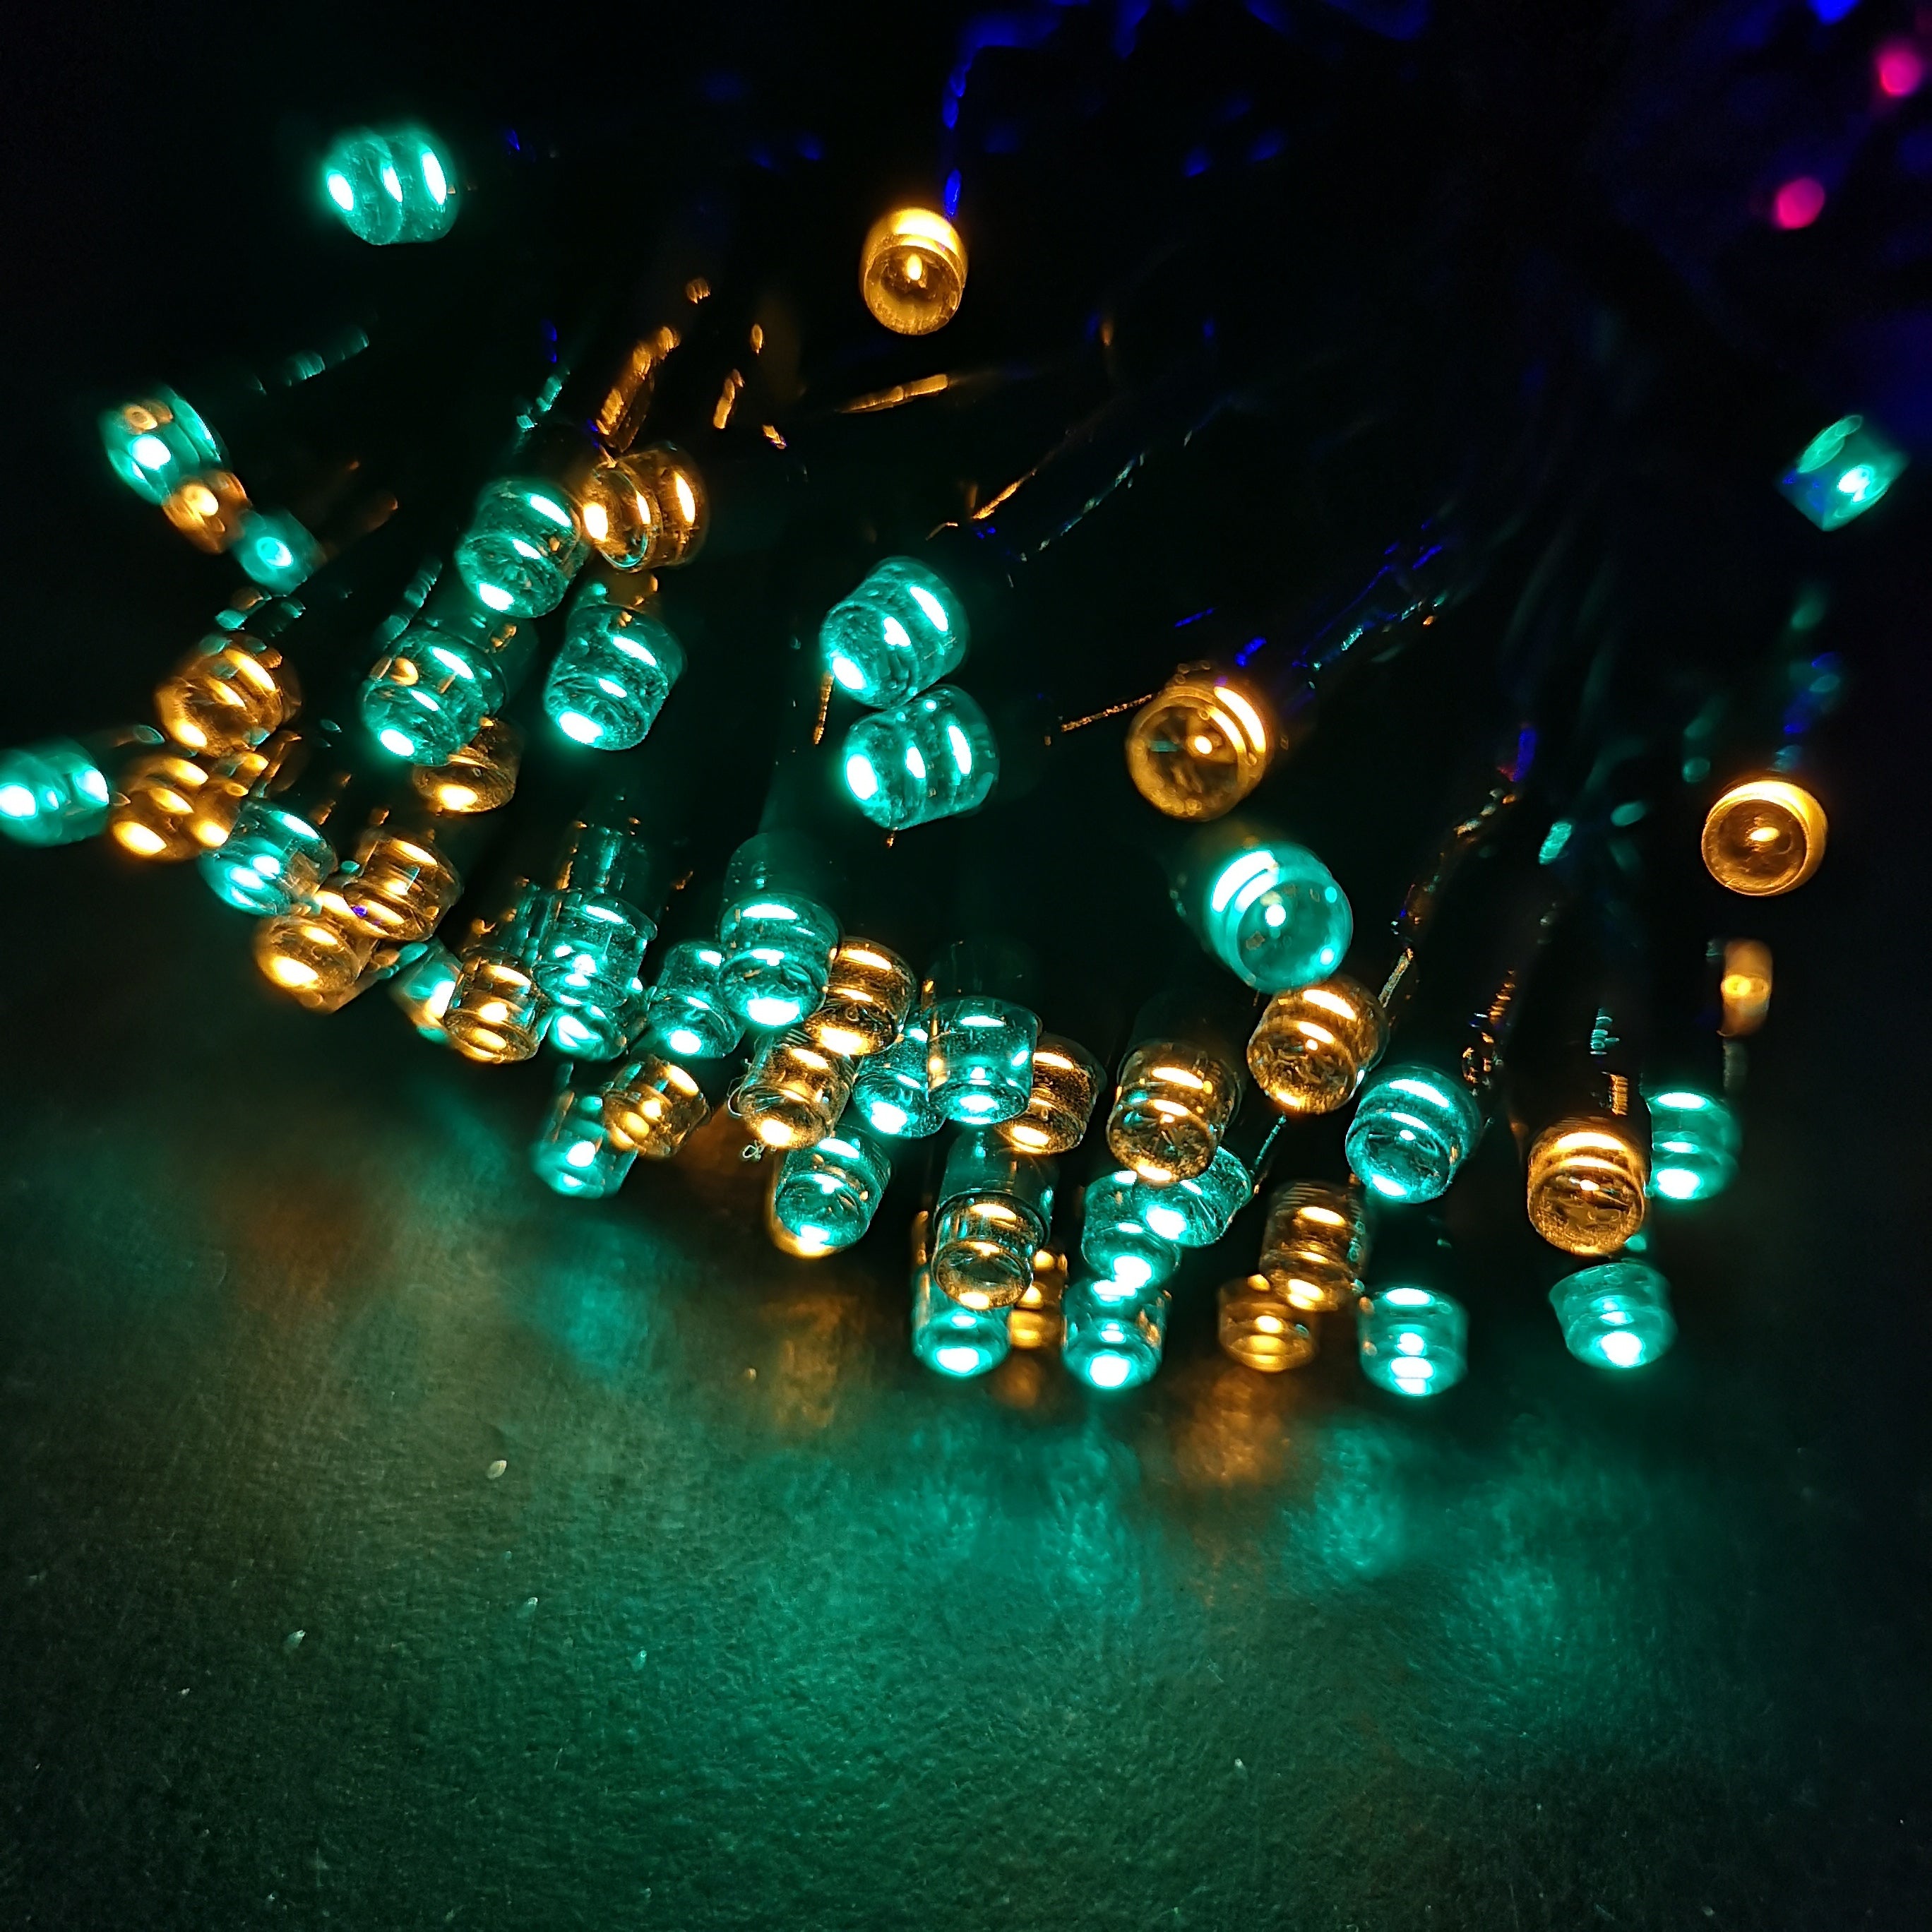 100 LED 10m Premier Christmas Indoor Outdoor Multi Function Battery Operated String Lights with Timer in Multicoloured